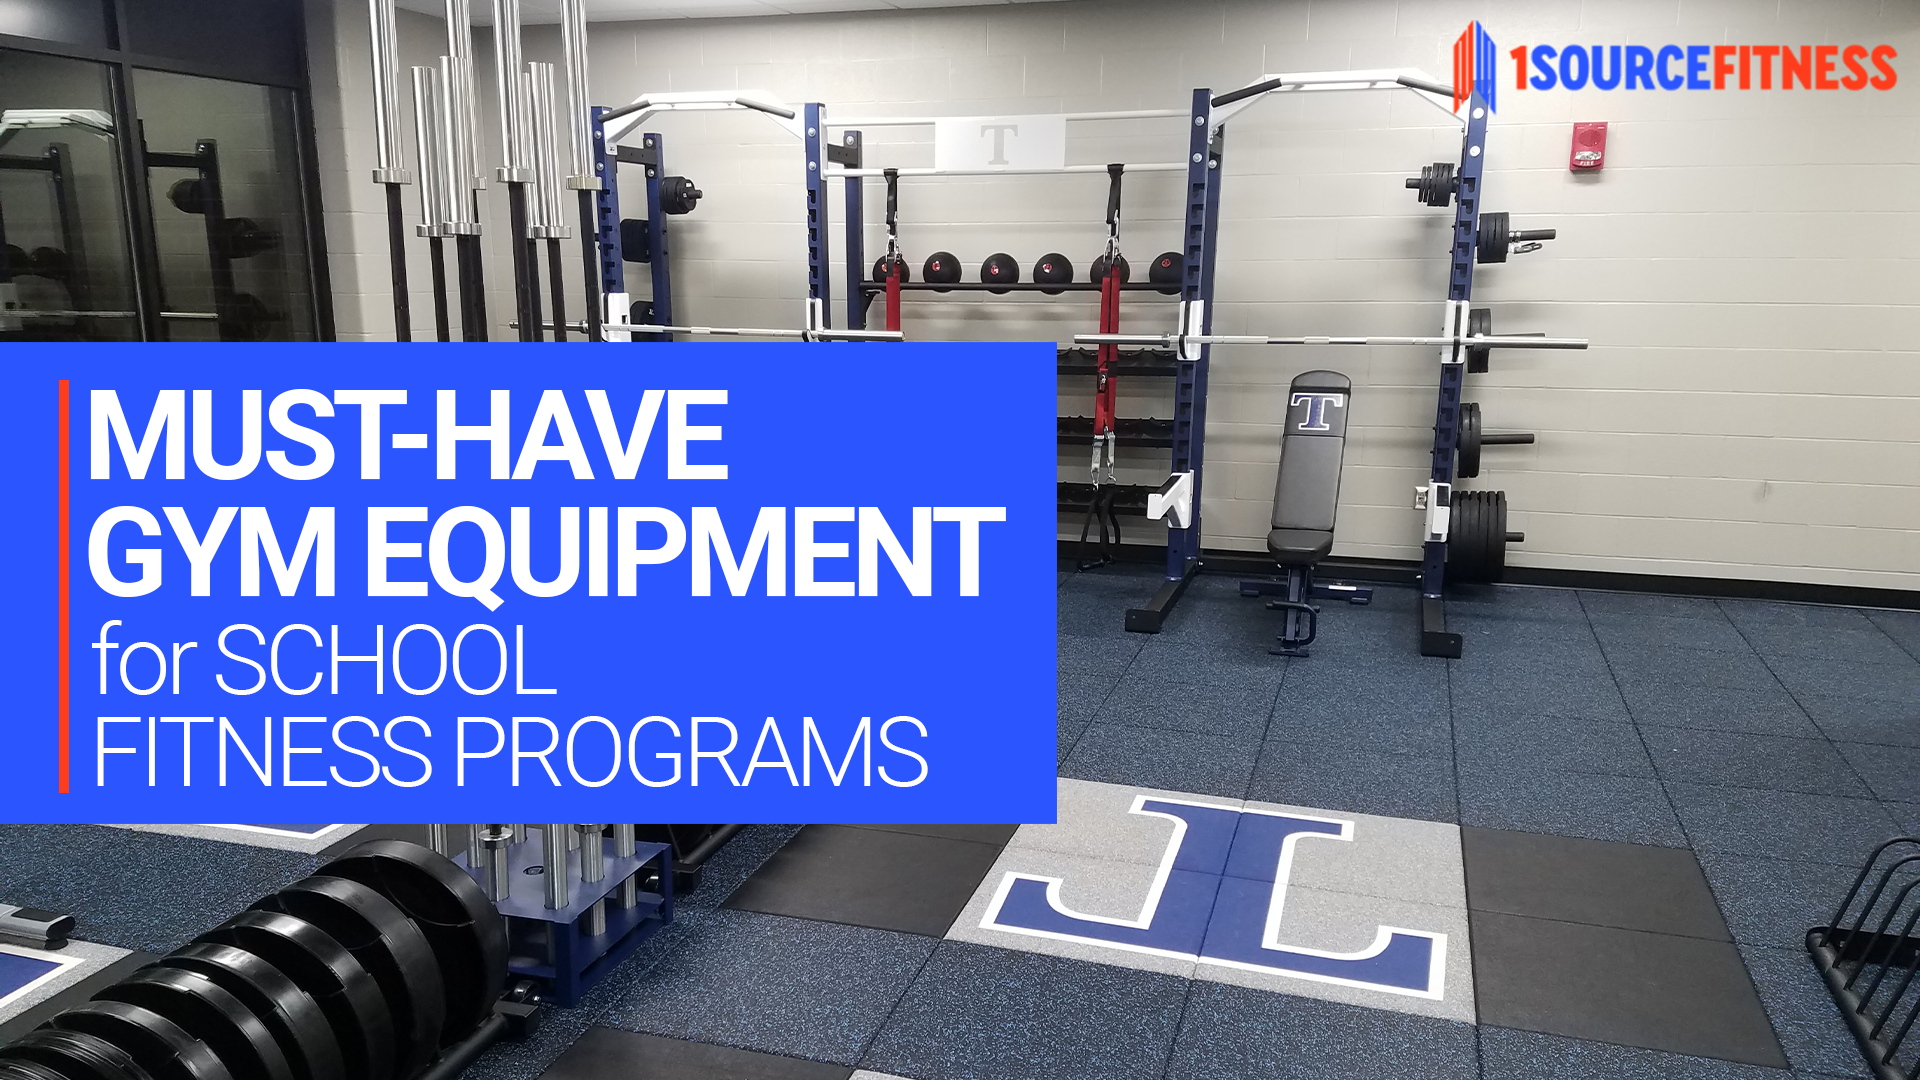 Must-Have Gym Equipment for School Fitness Programs